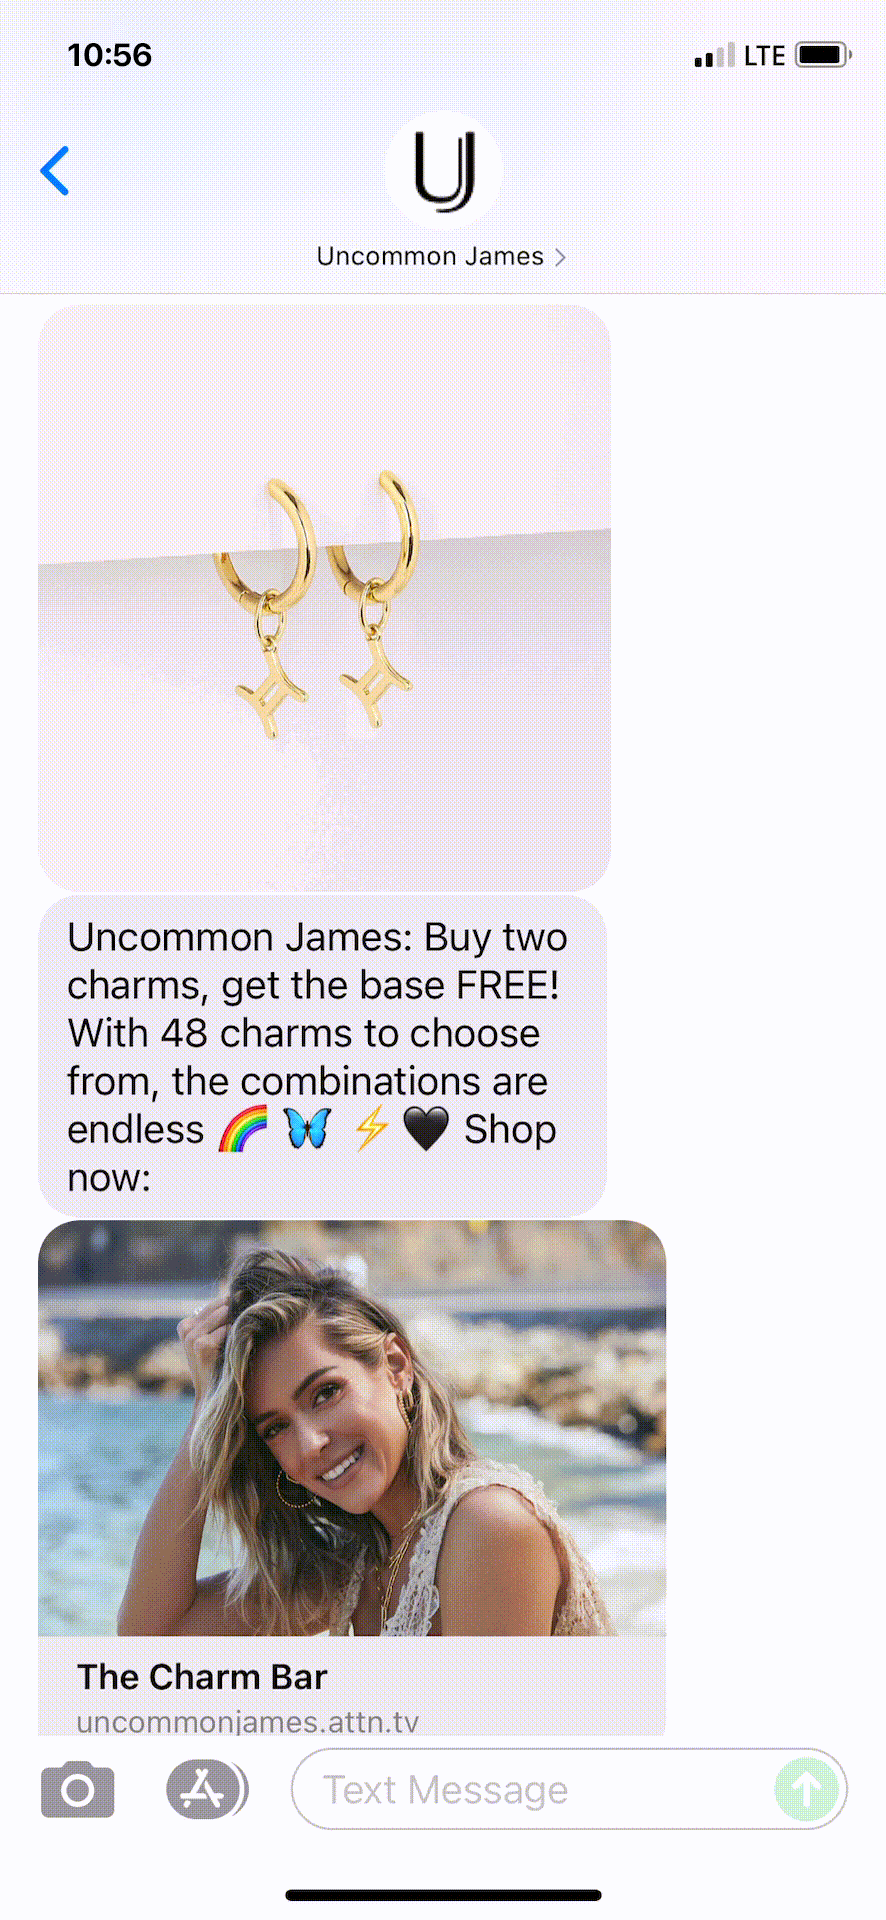 Uncommon-James-Text-Message-Marketing-Example-06.10.2021